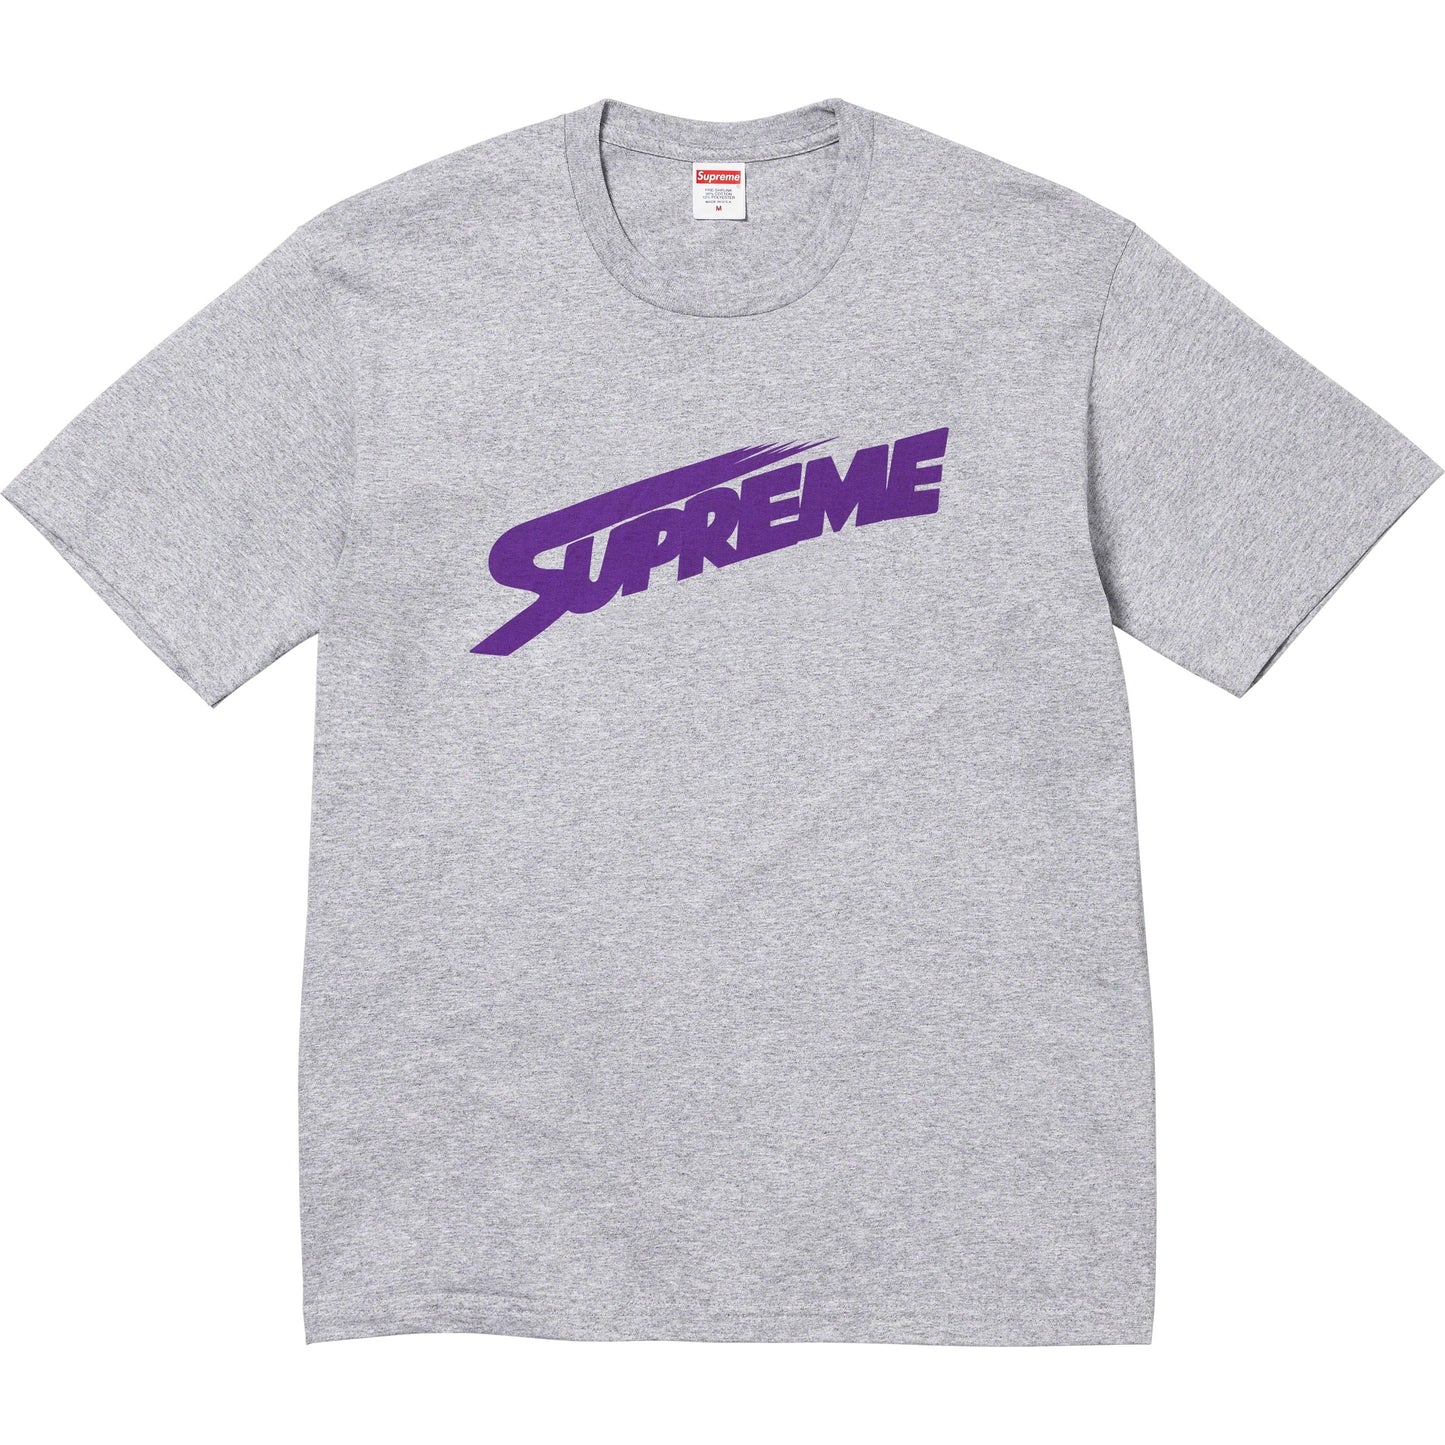 Supreme Mont Blanc Tee Heather Grey from Supreme